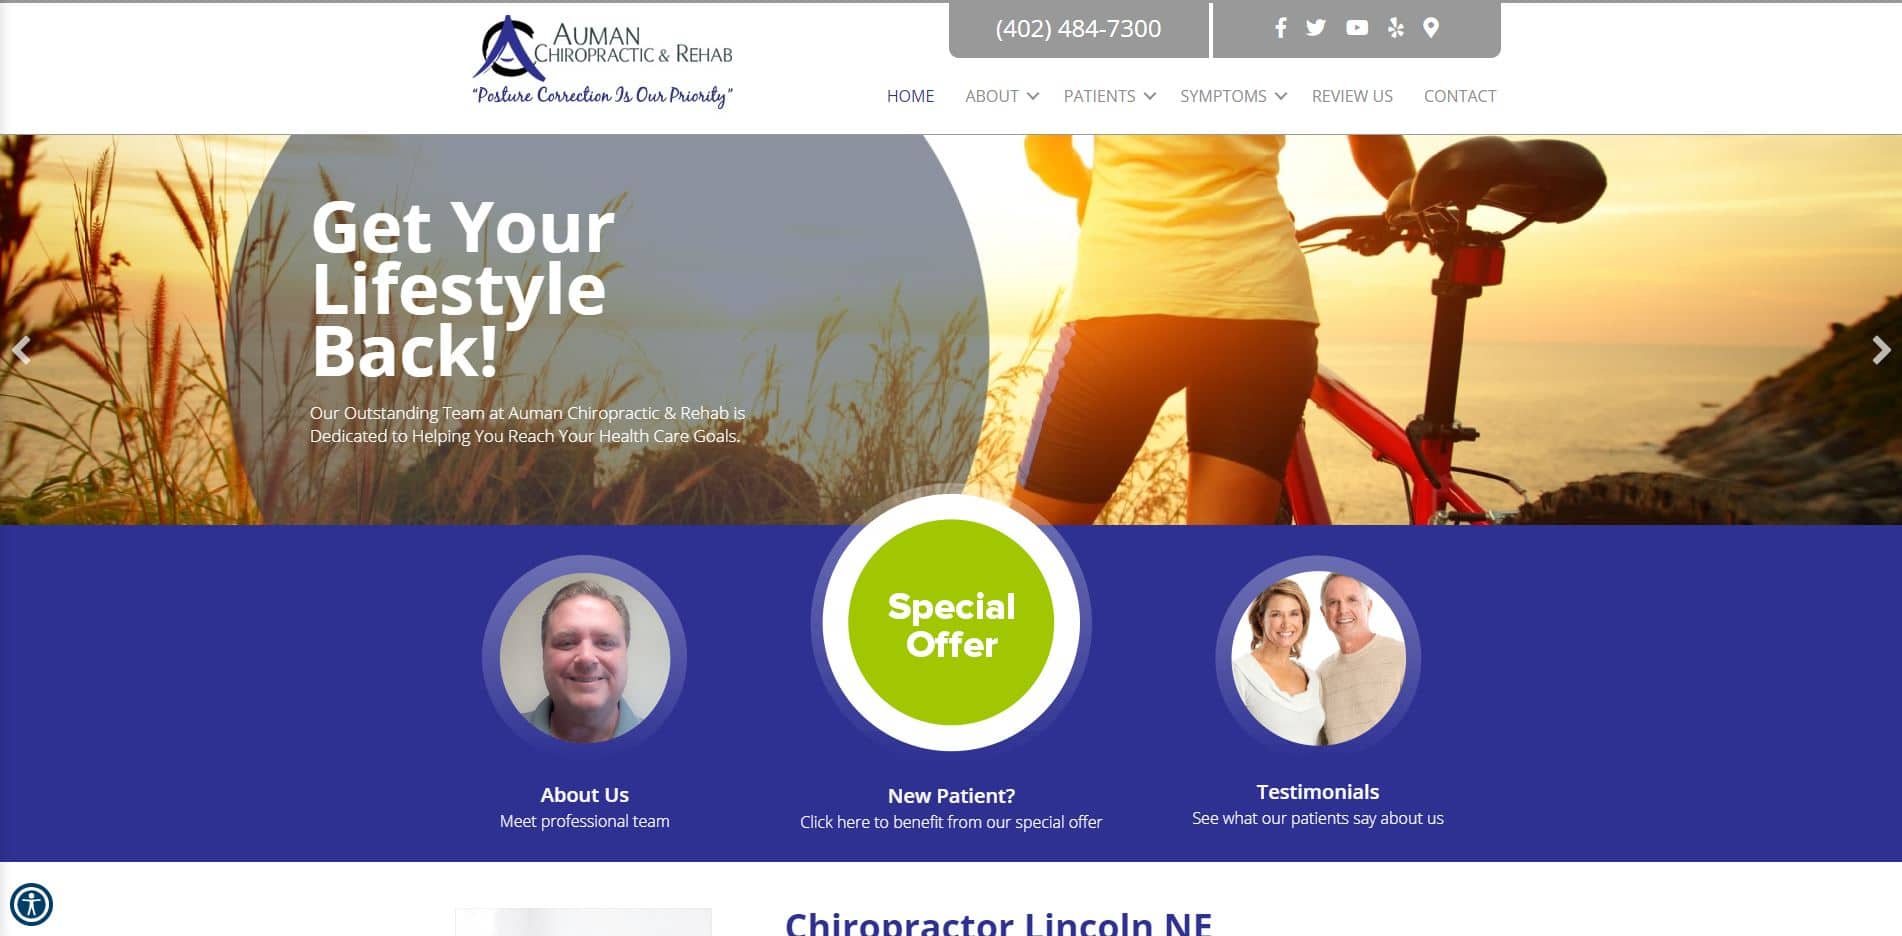 Chiropractor in Lincoln